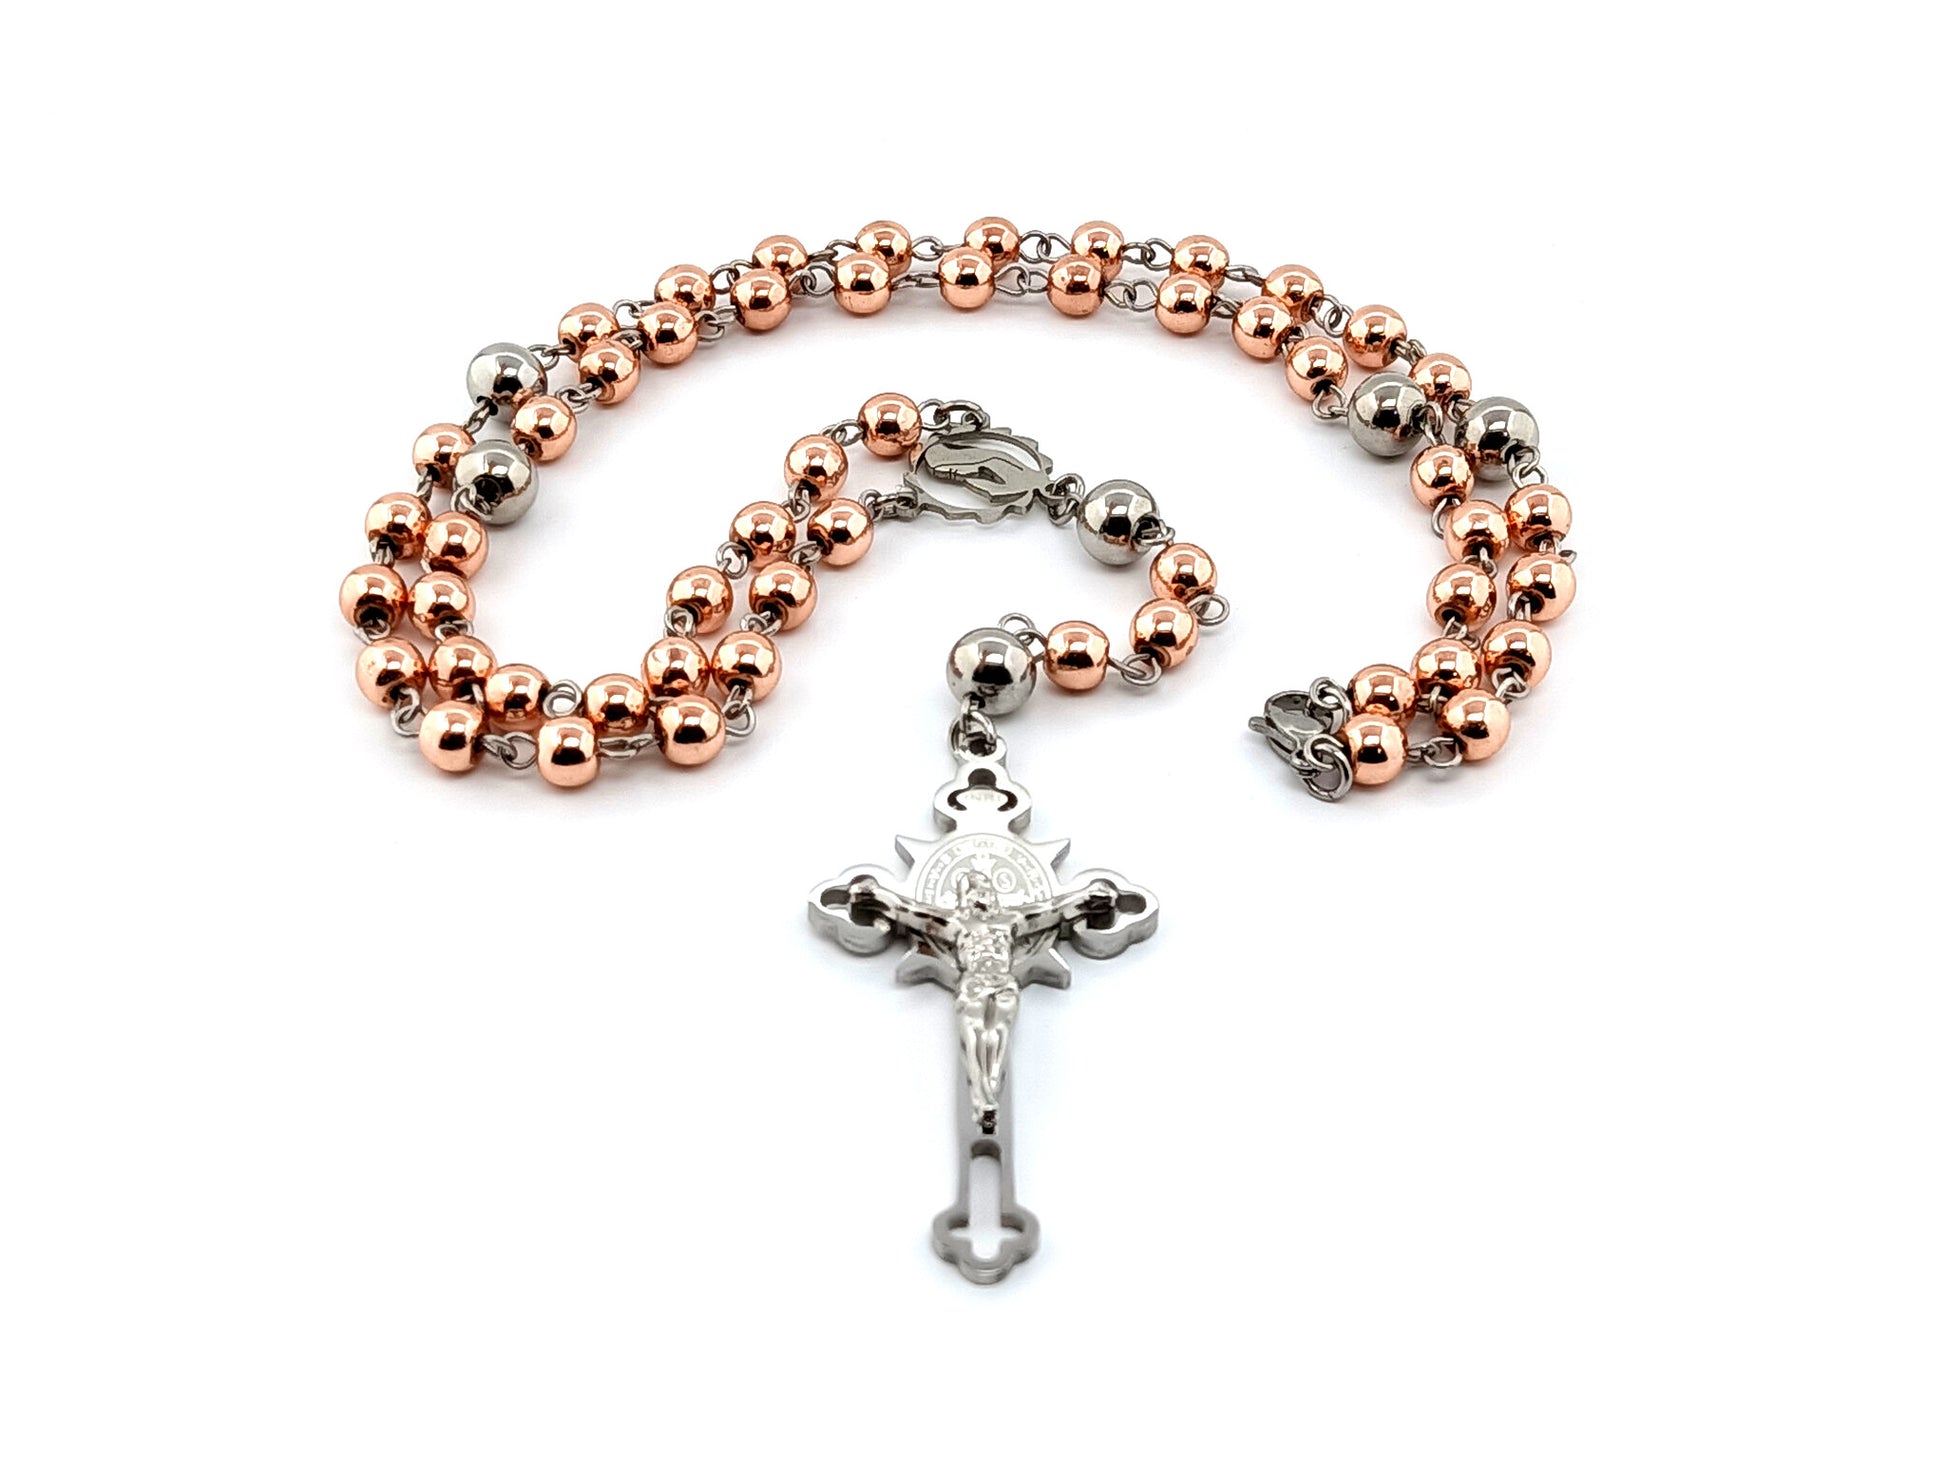 Virgin Mary unique rosary beads necklace with hematite gemstone and stainless steel beads and engraved Saint Benedict stainless steel crucifix.